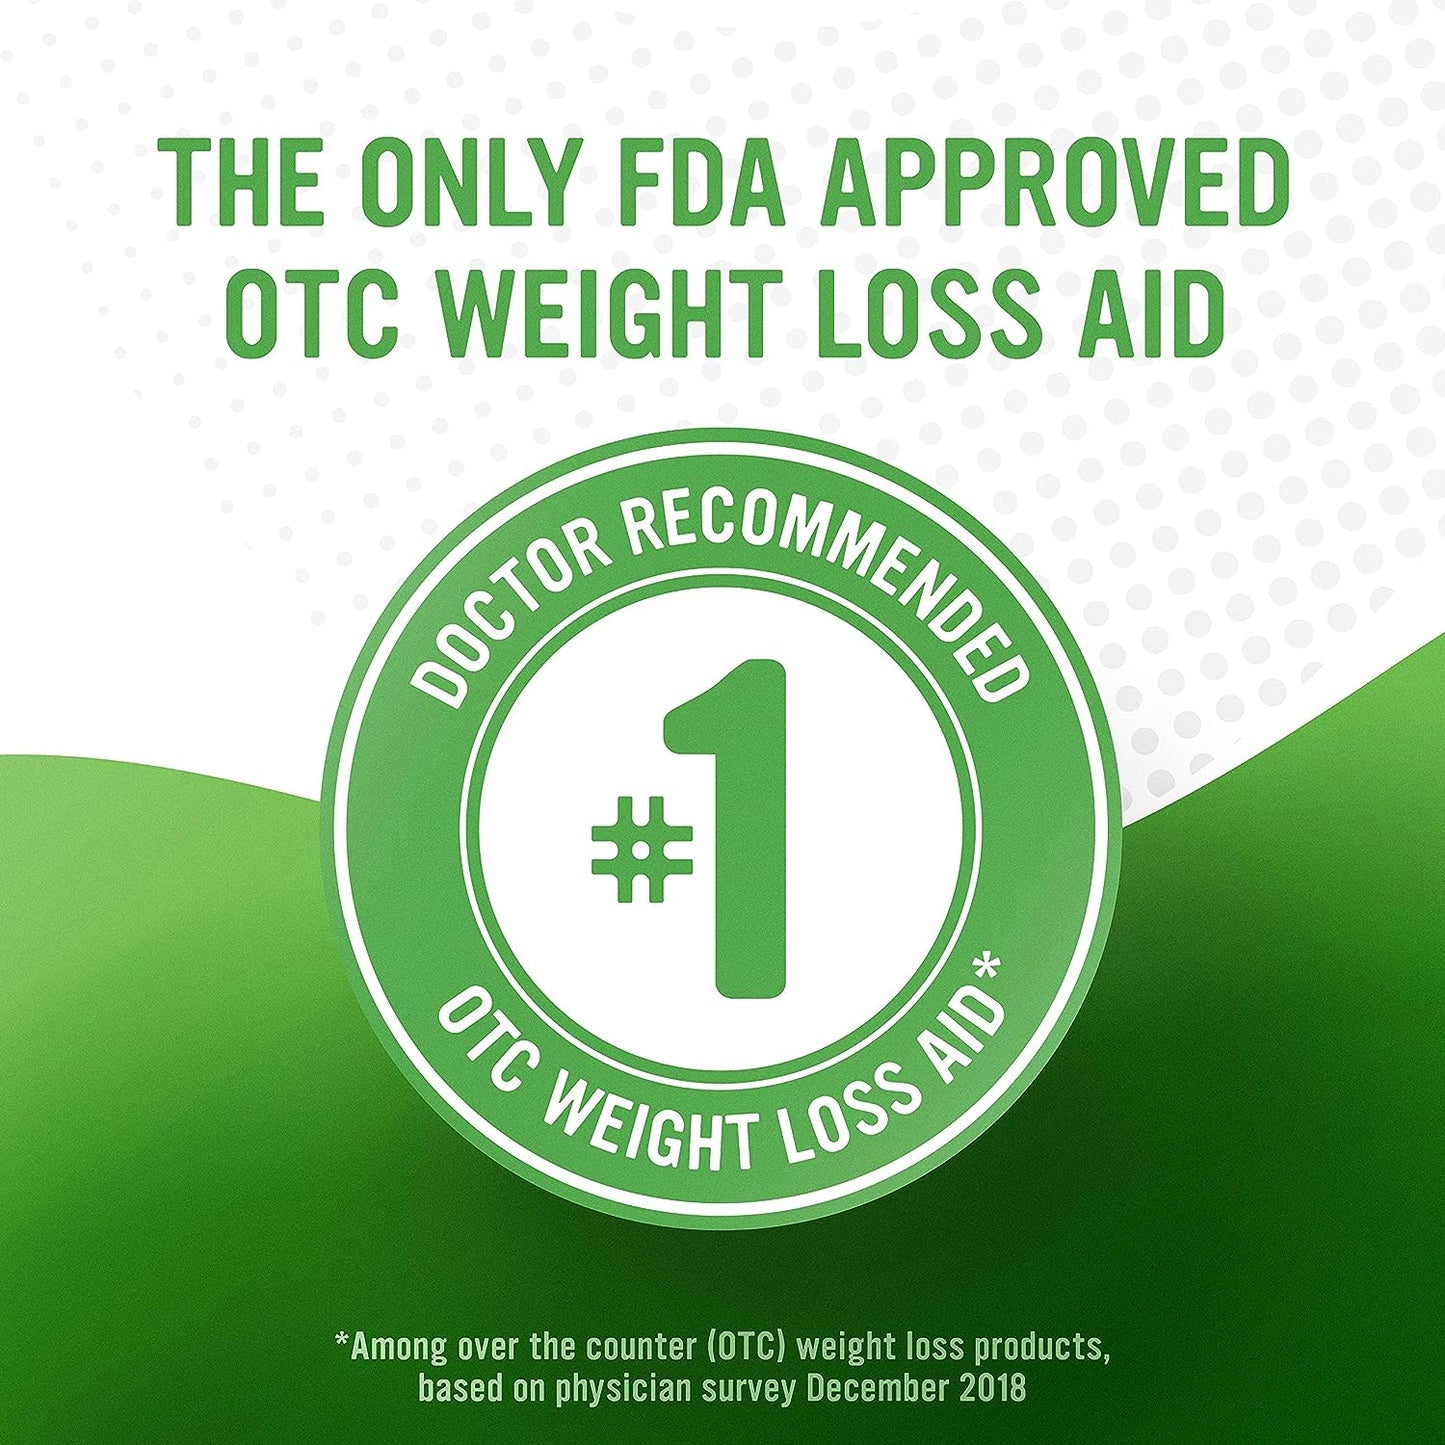 FDA APPROVED - alli Diet Weight Loss Supplement Orlistat Capsules, 60 mg (120 capsules)